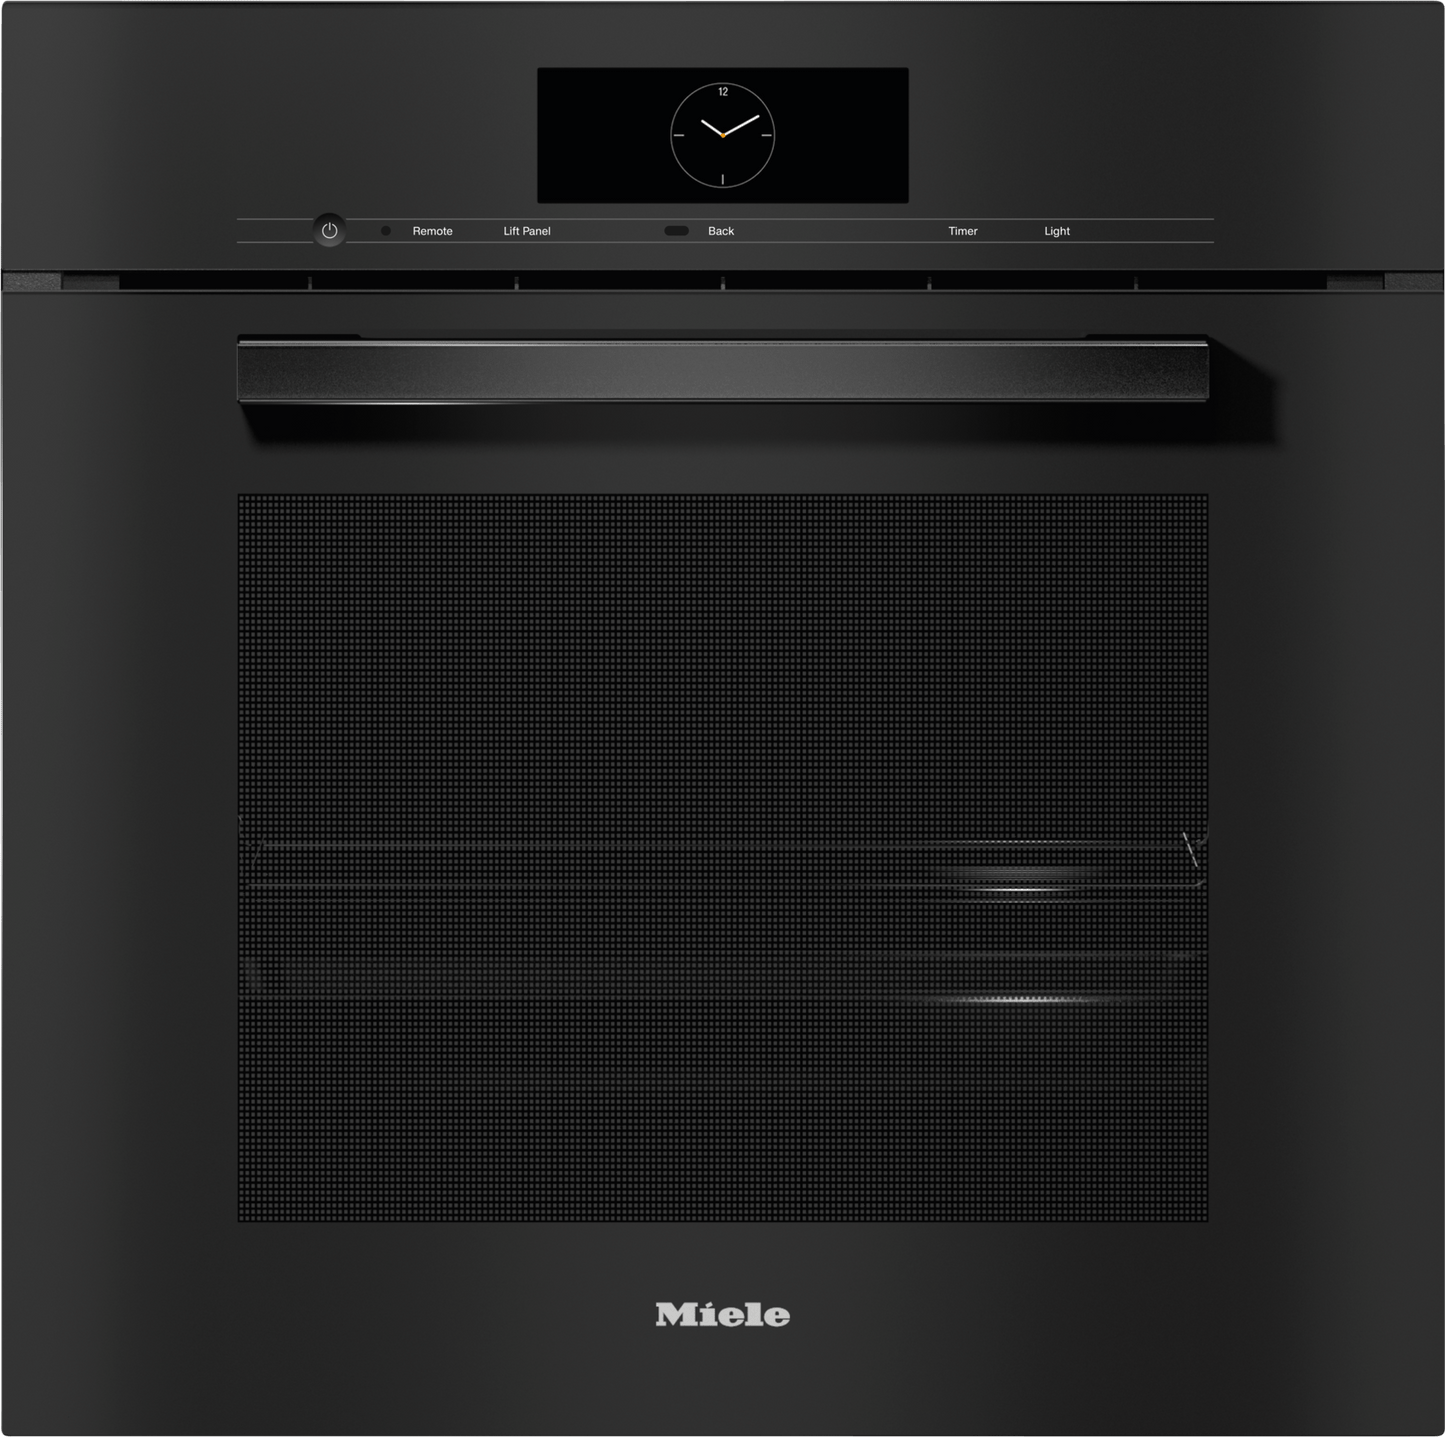 Miele DGC7860AMOBSIDIANBLACK Dgc 7860 Am - 24" Combi-Steam Oven Xxl For Steam Cooking, Baking, Roasting With Roast Probe + Menu Cooking.